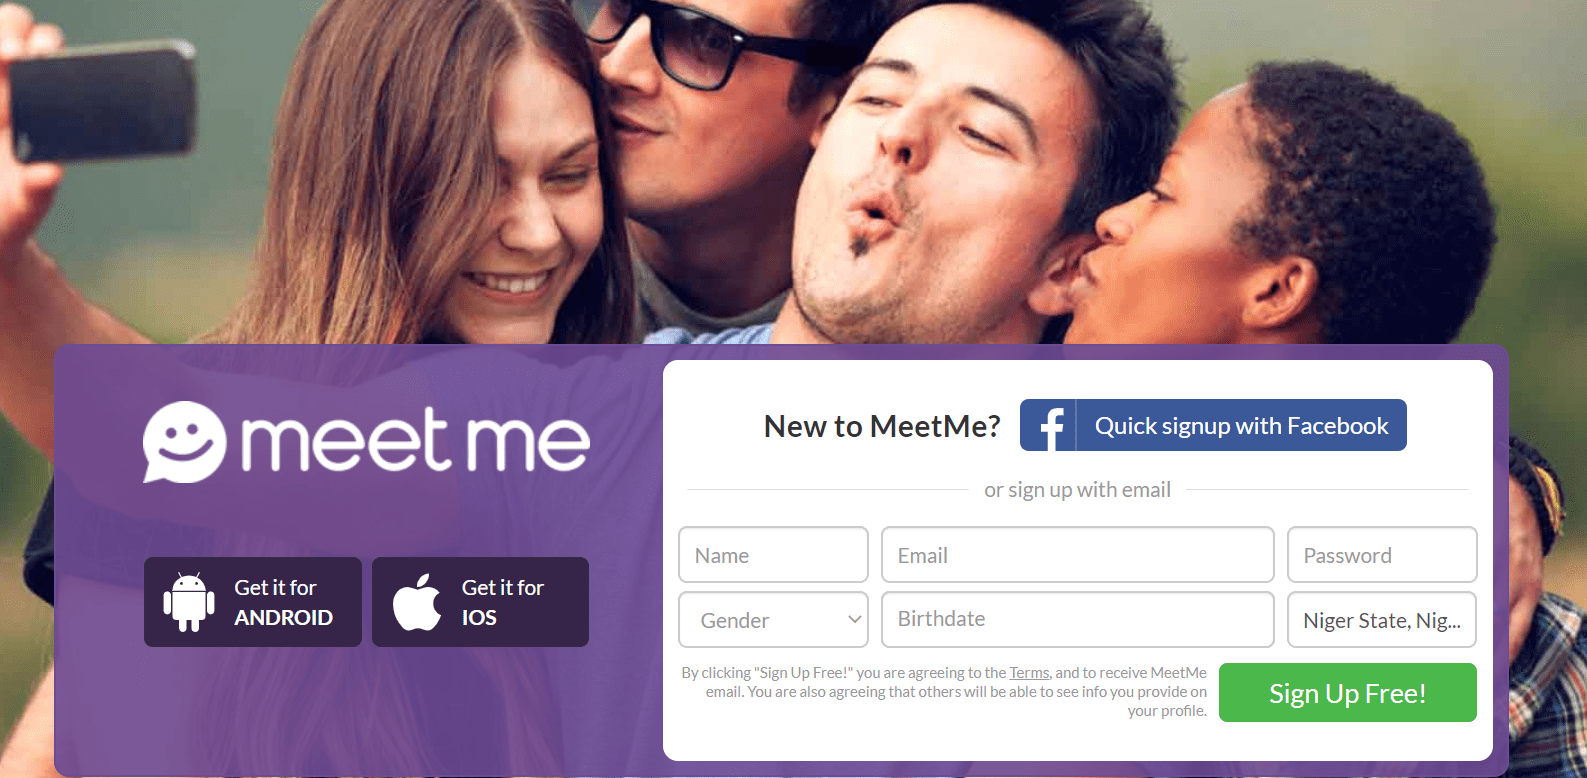 Login to Meetme or Sign Up for – Meetme Login at www.meetme.com